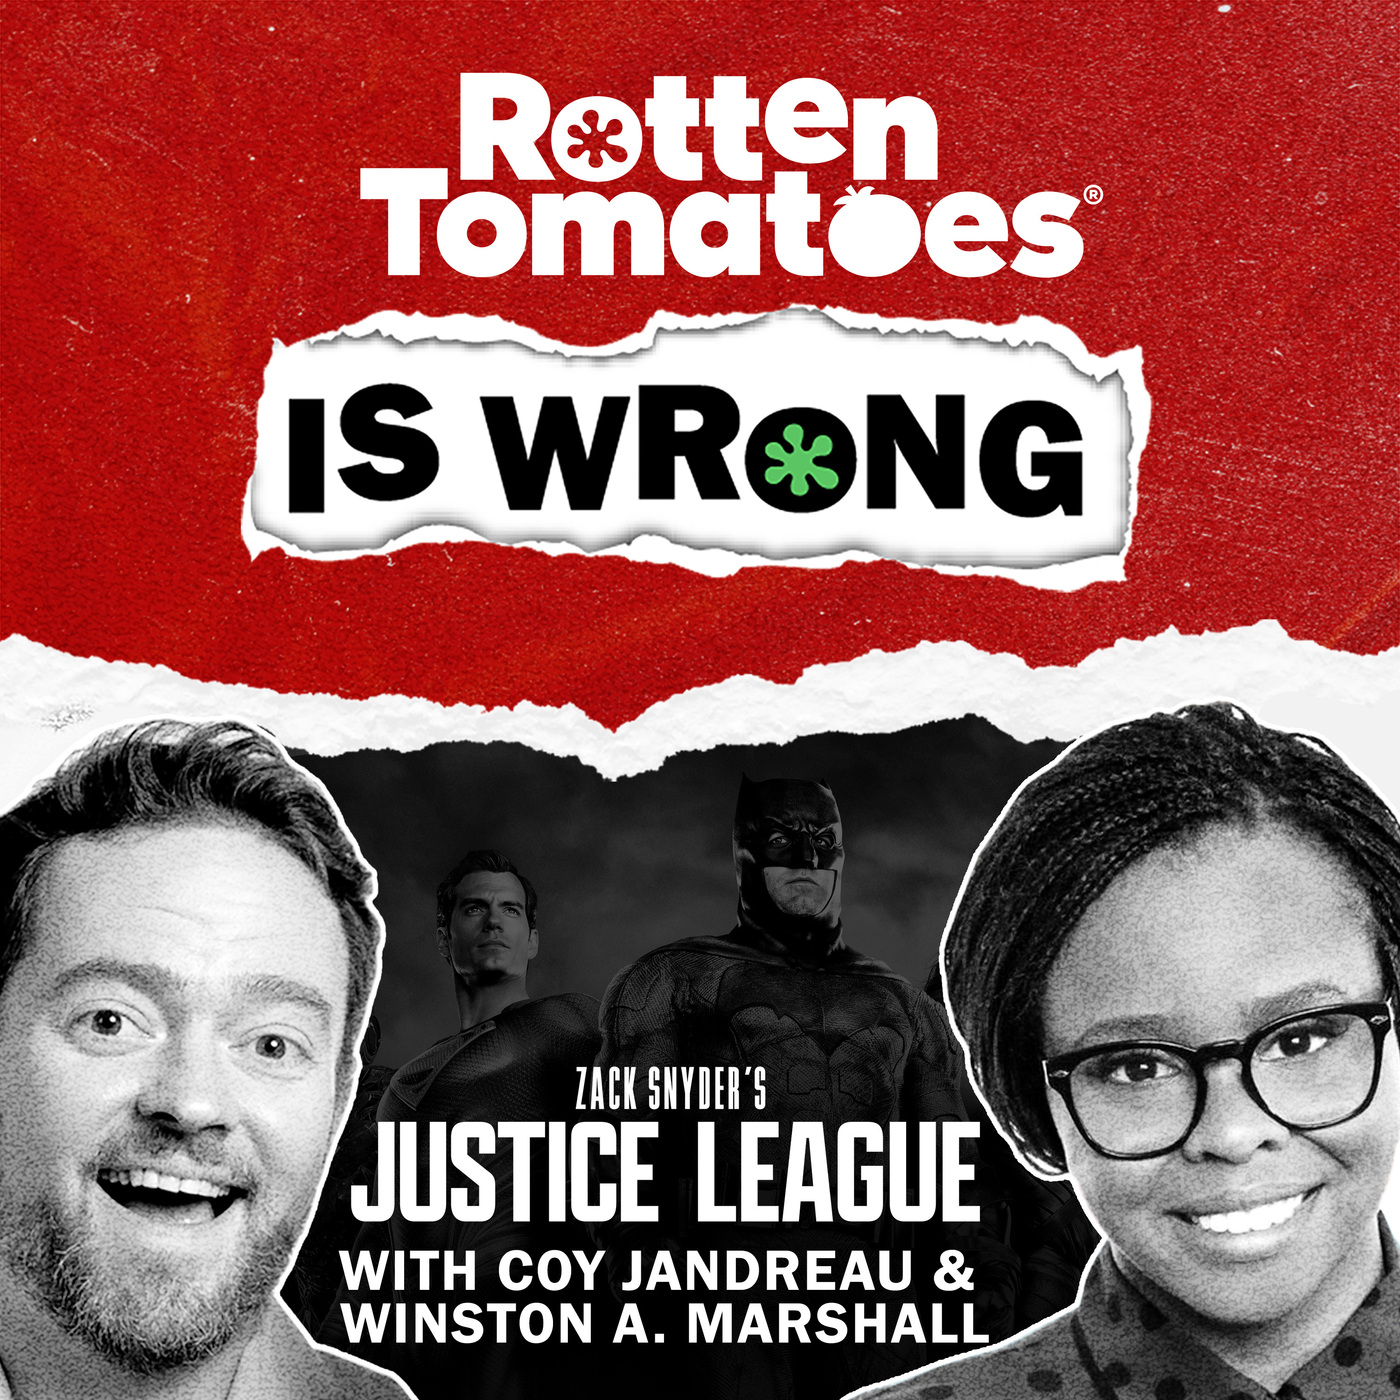 The League - Rotten Tomatoes